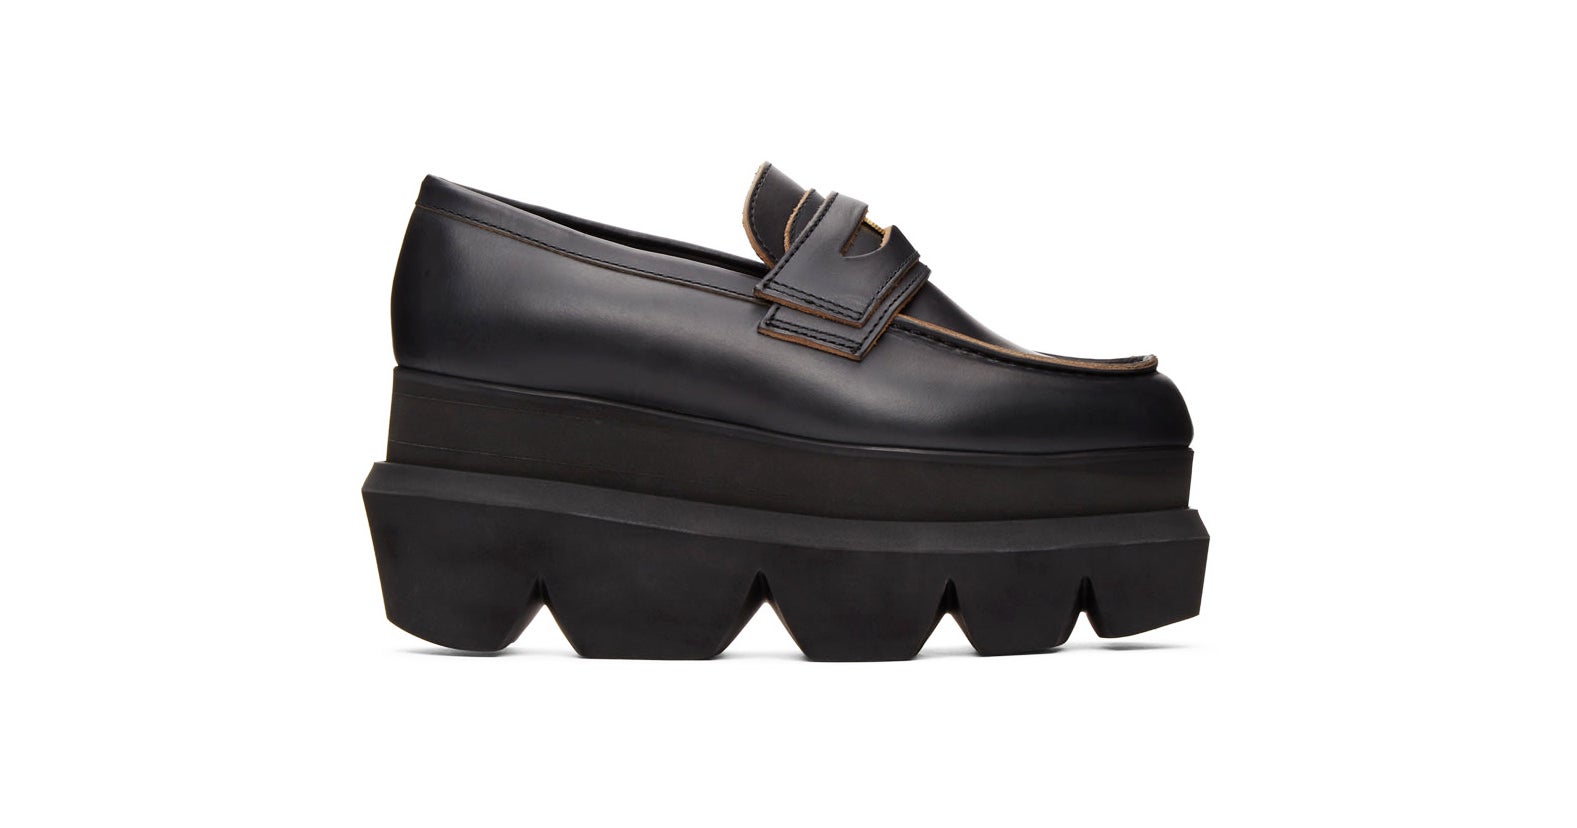 Chunky Platform Loafers Are Women's Hottest Shoe Trend